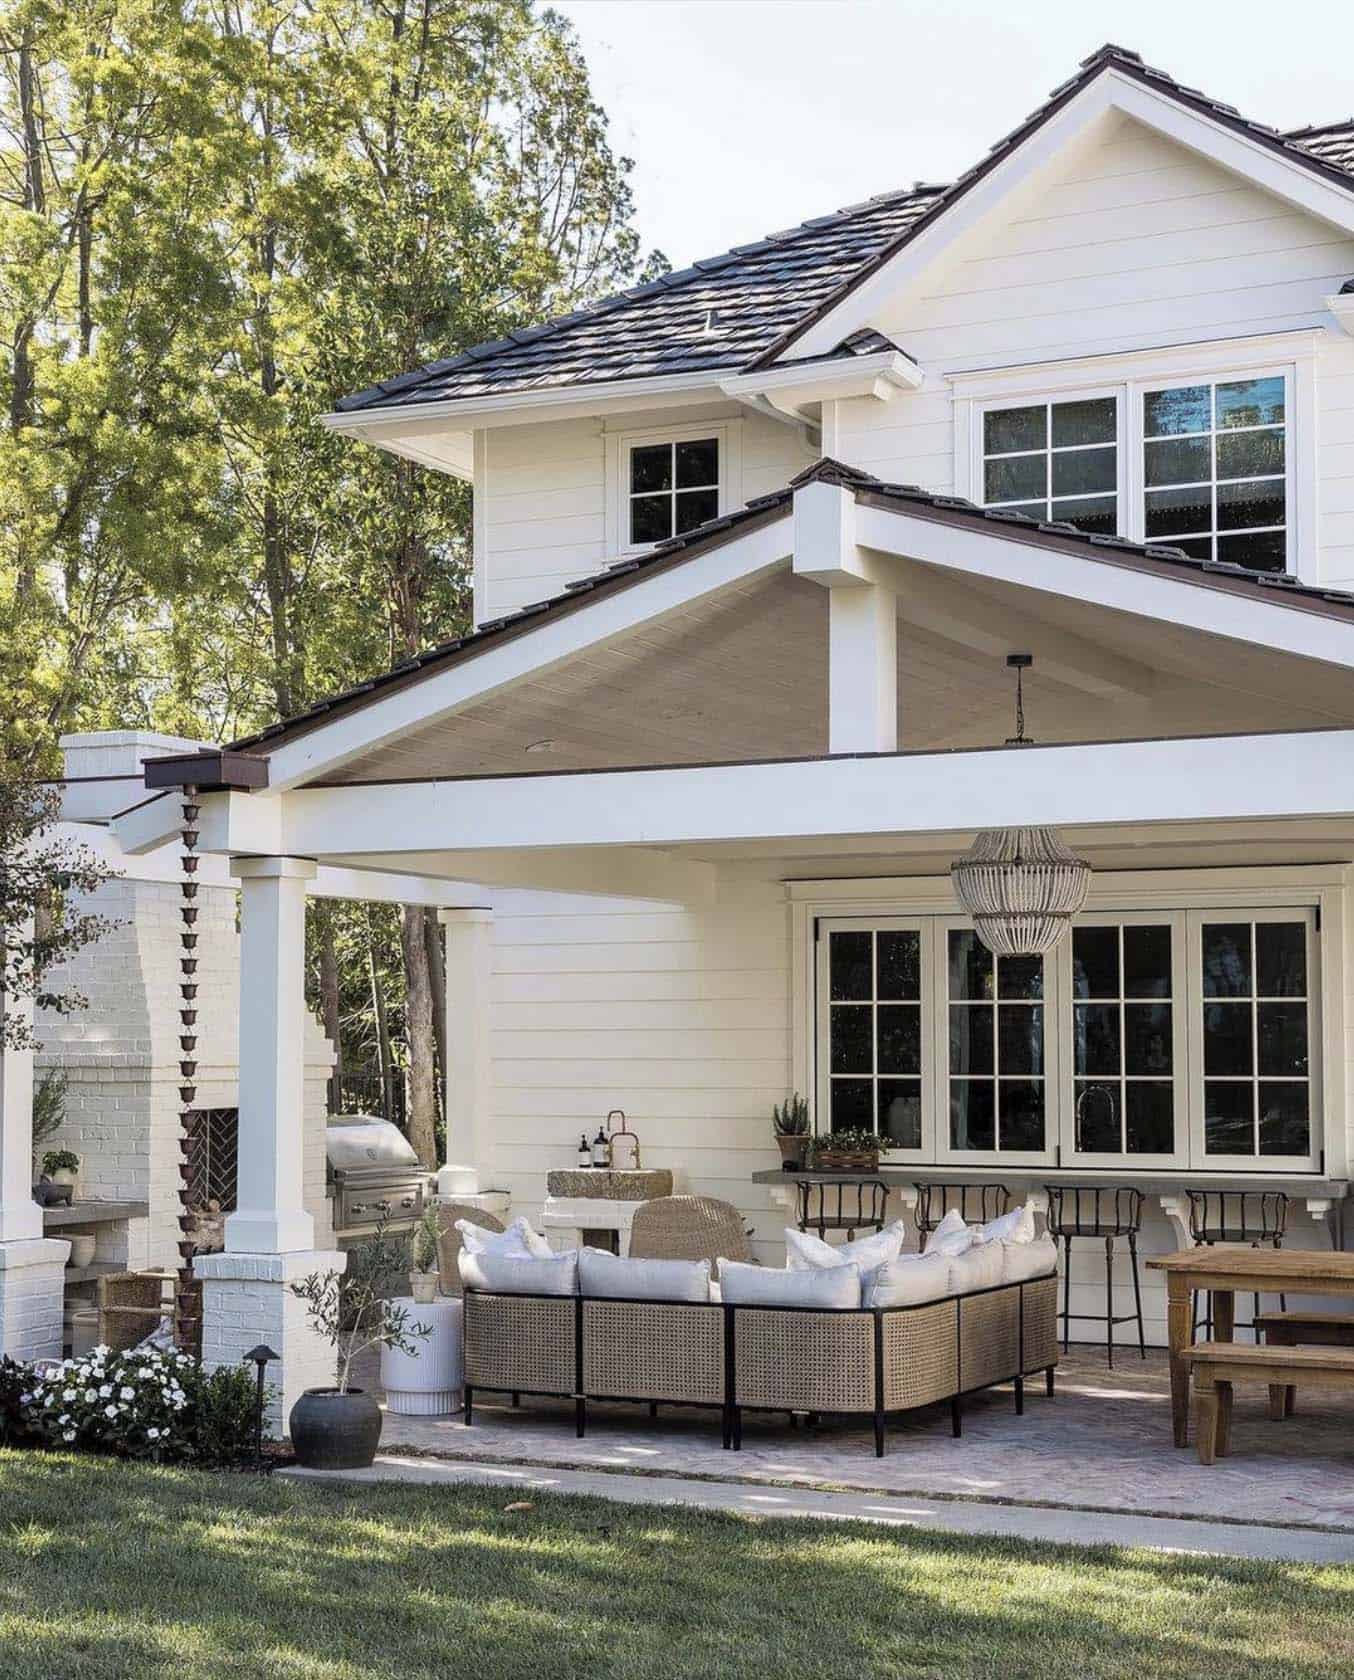 traditional style home exterior backyard with a covered porch